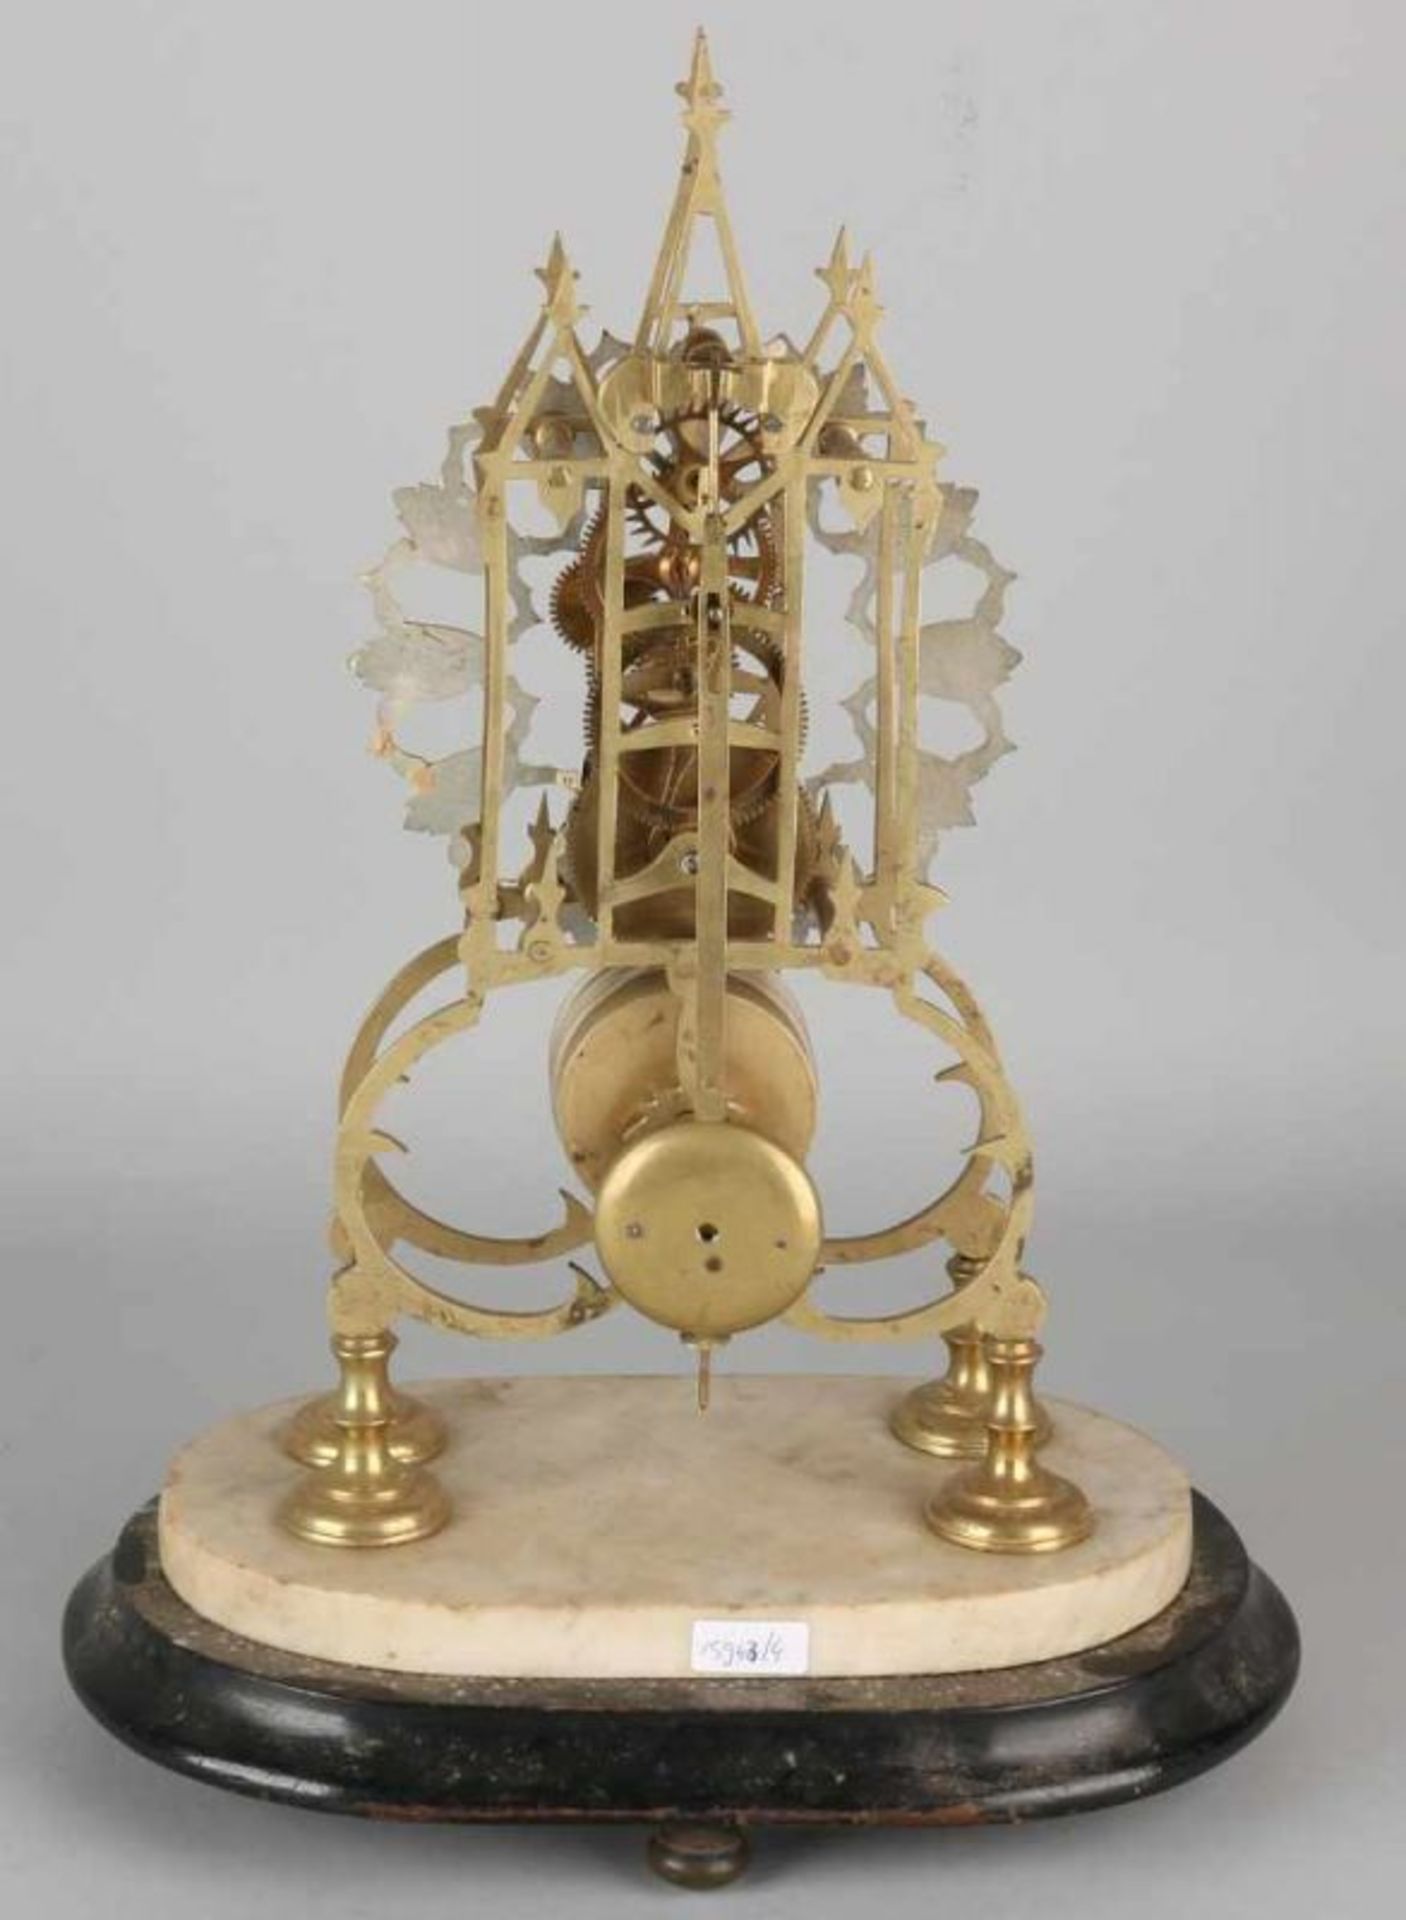 Antique English brass skeleton clock with fusee. On wood with alabaster basement. Circa 1880. - Image 3 of 3